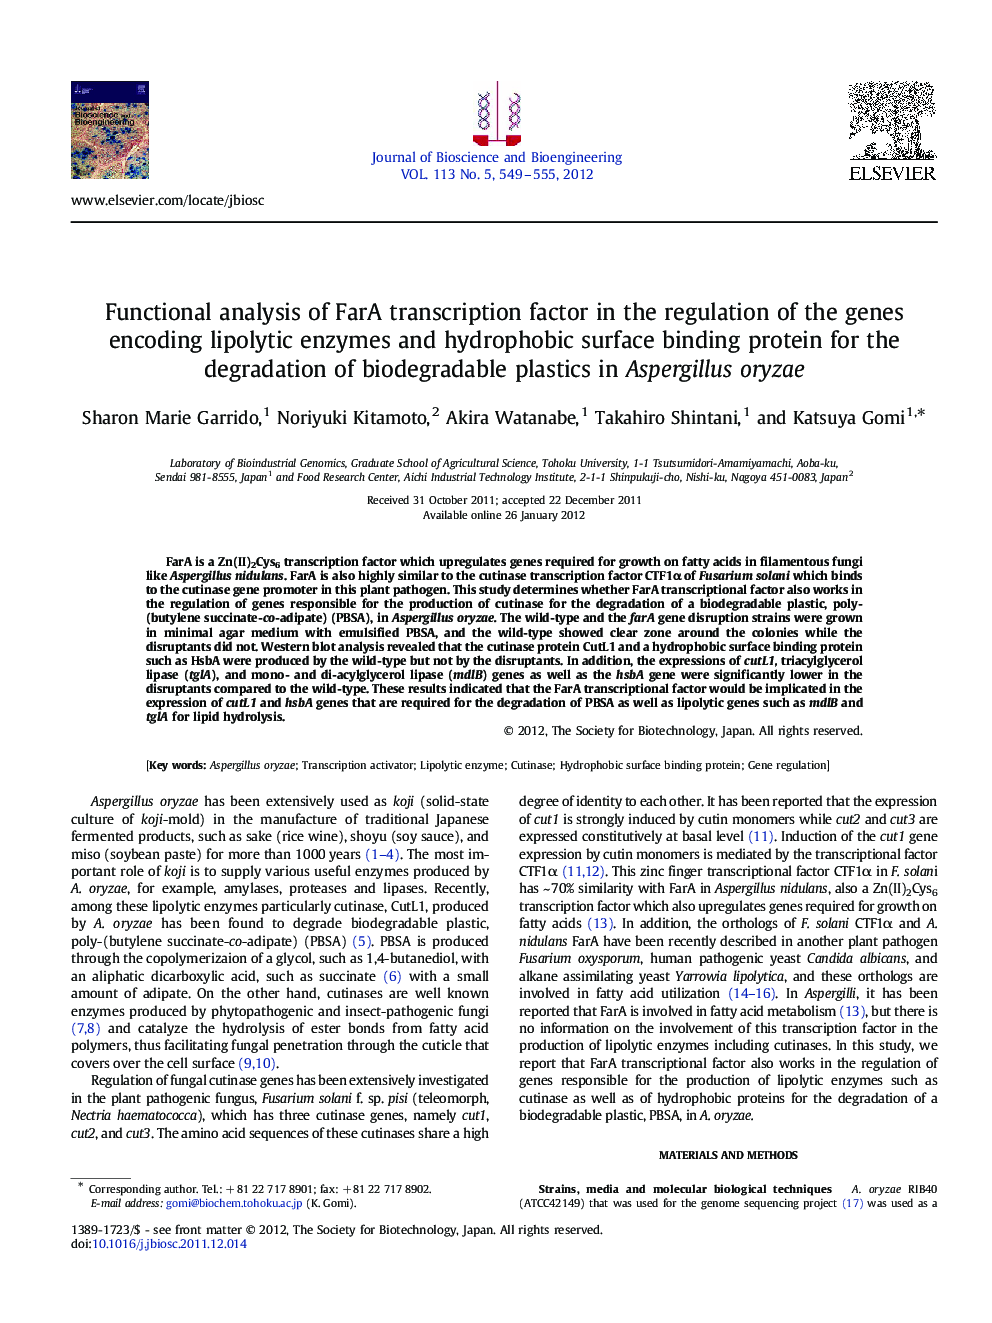 Functional analysis of FarA transcription factor in the regulation of the genes encoding lipolytic enzymes and hydrophobic surface binding protein for the degradation of biodegradable plastics in Aspergillus oryzae